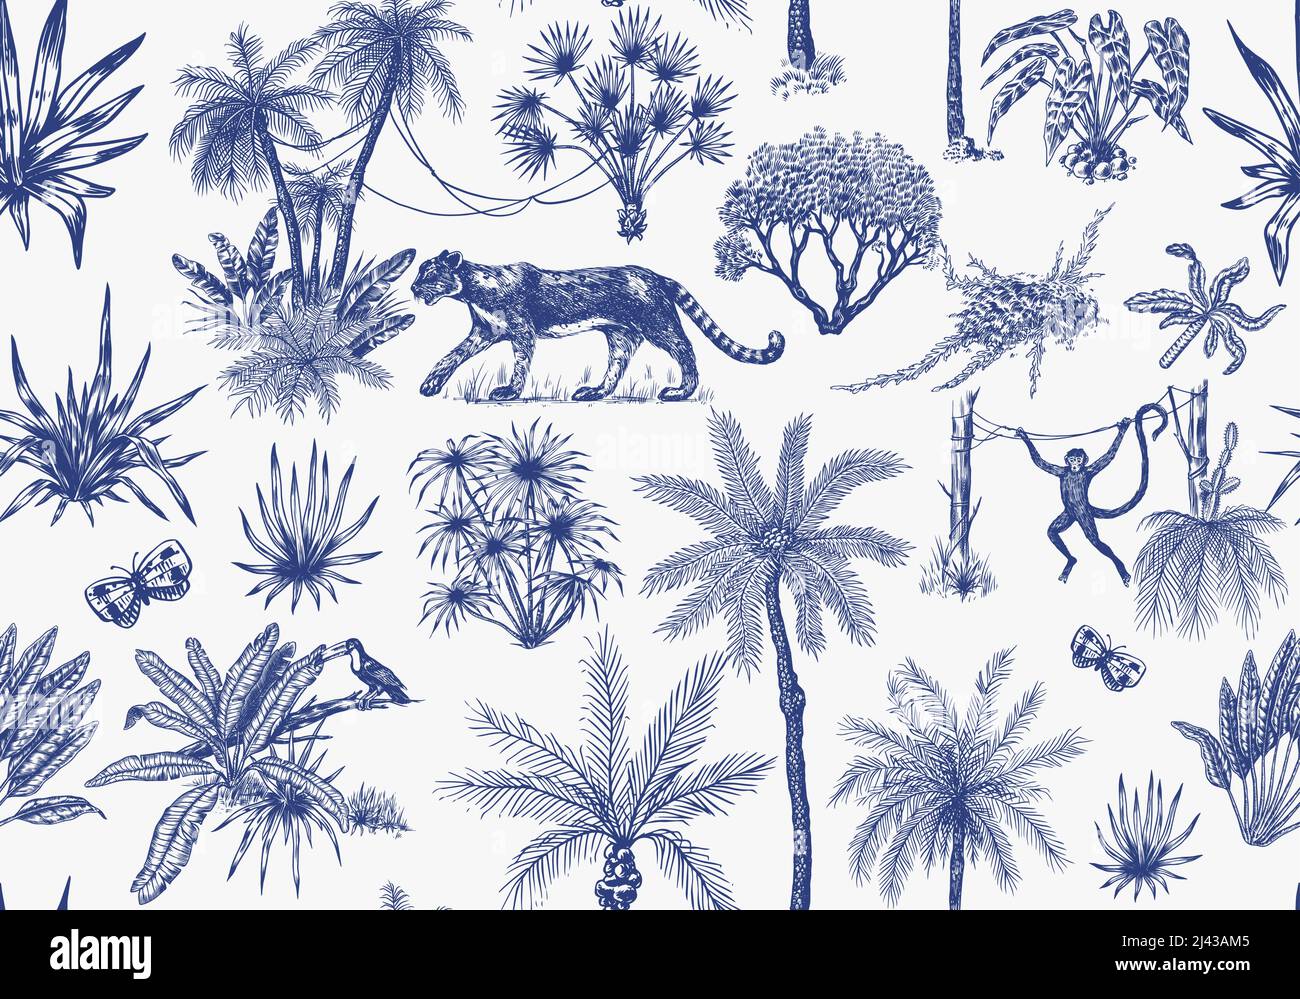 Toile De Jouy banner. Wild tiger and exotic plants. Seamless pattern. Toucan bird and monkey. Exotic Tropical trees. Eastern landscape. Linear Jungle Stock Vector